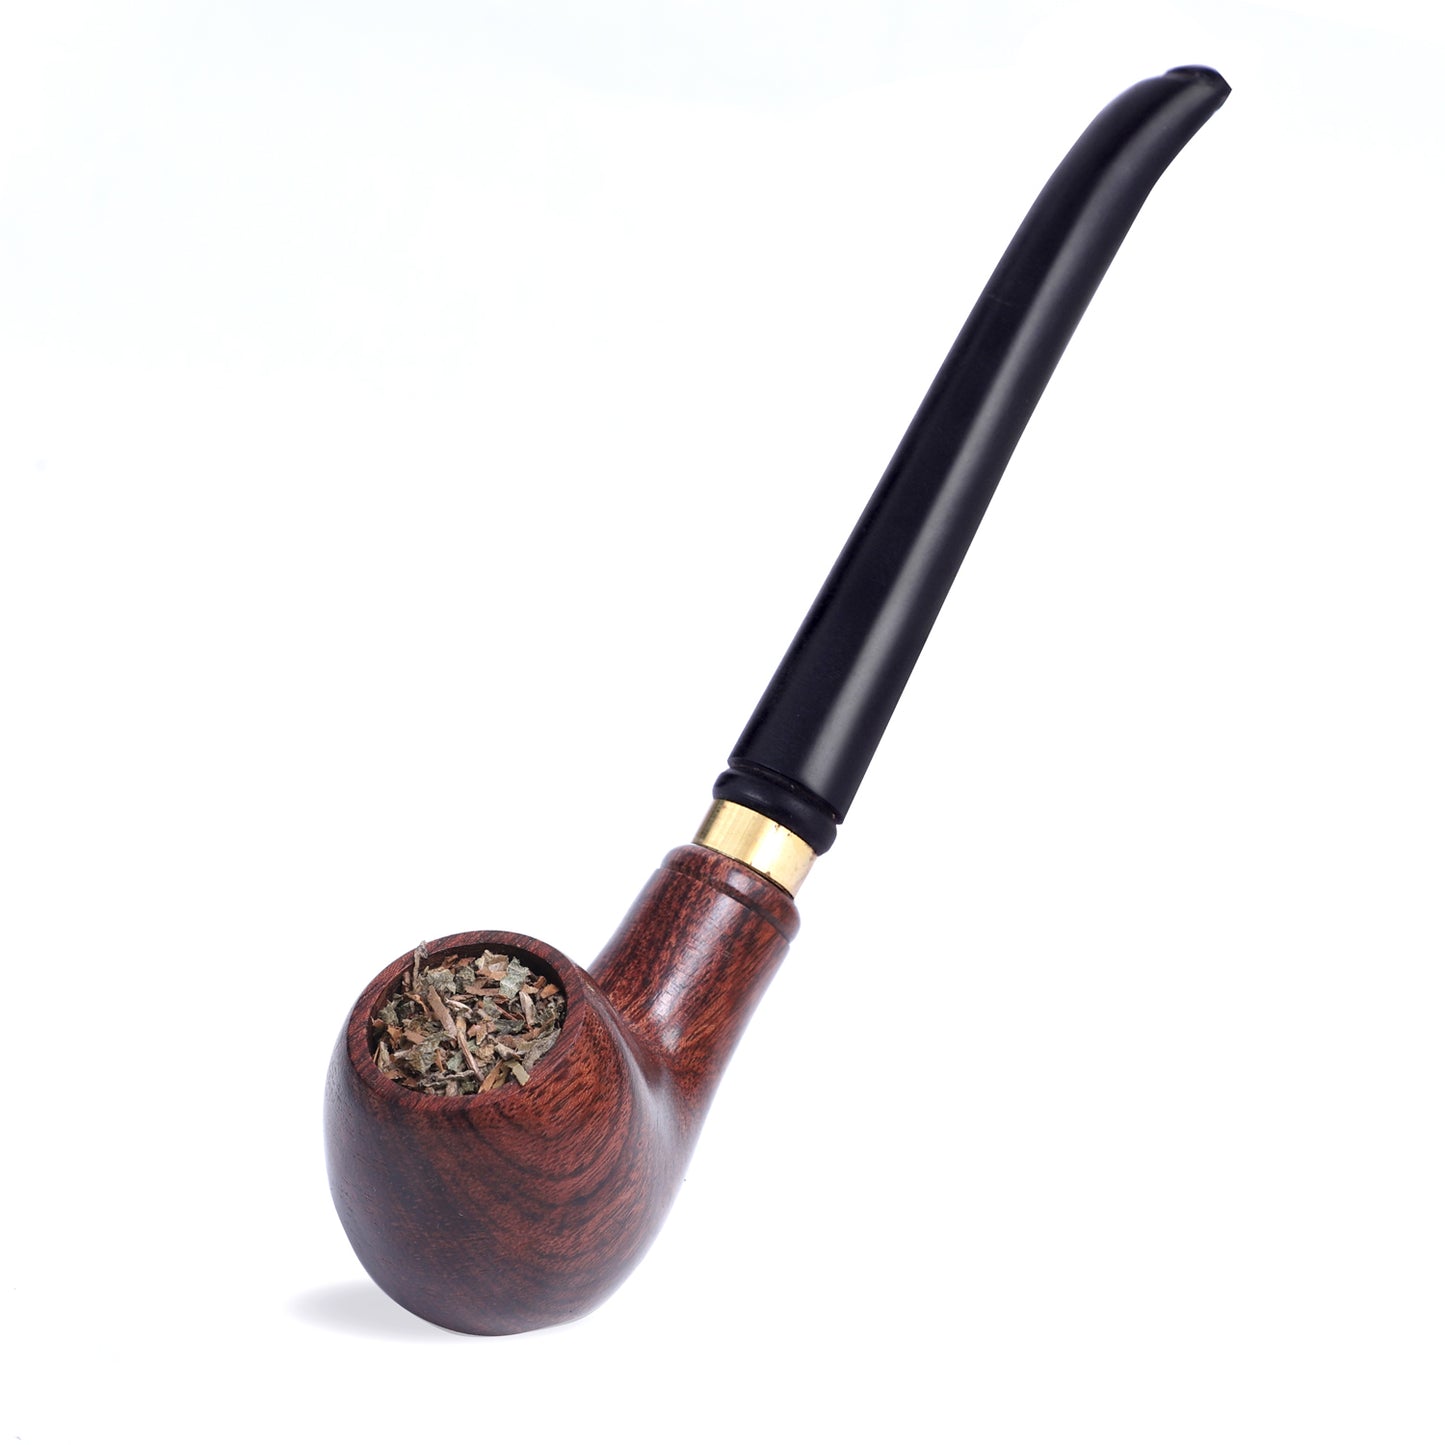 Wooden Smoking Pipe With Black Handle